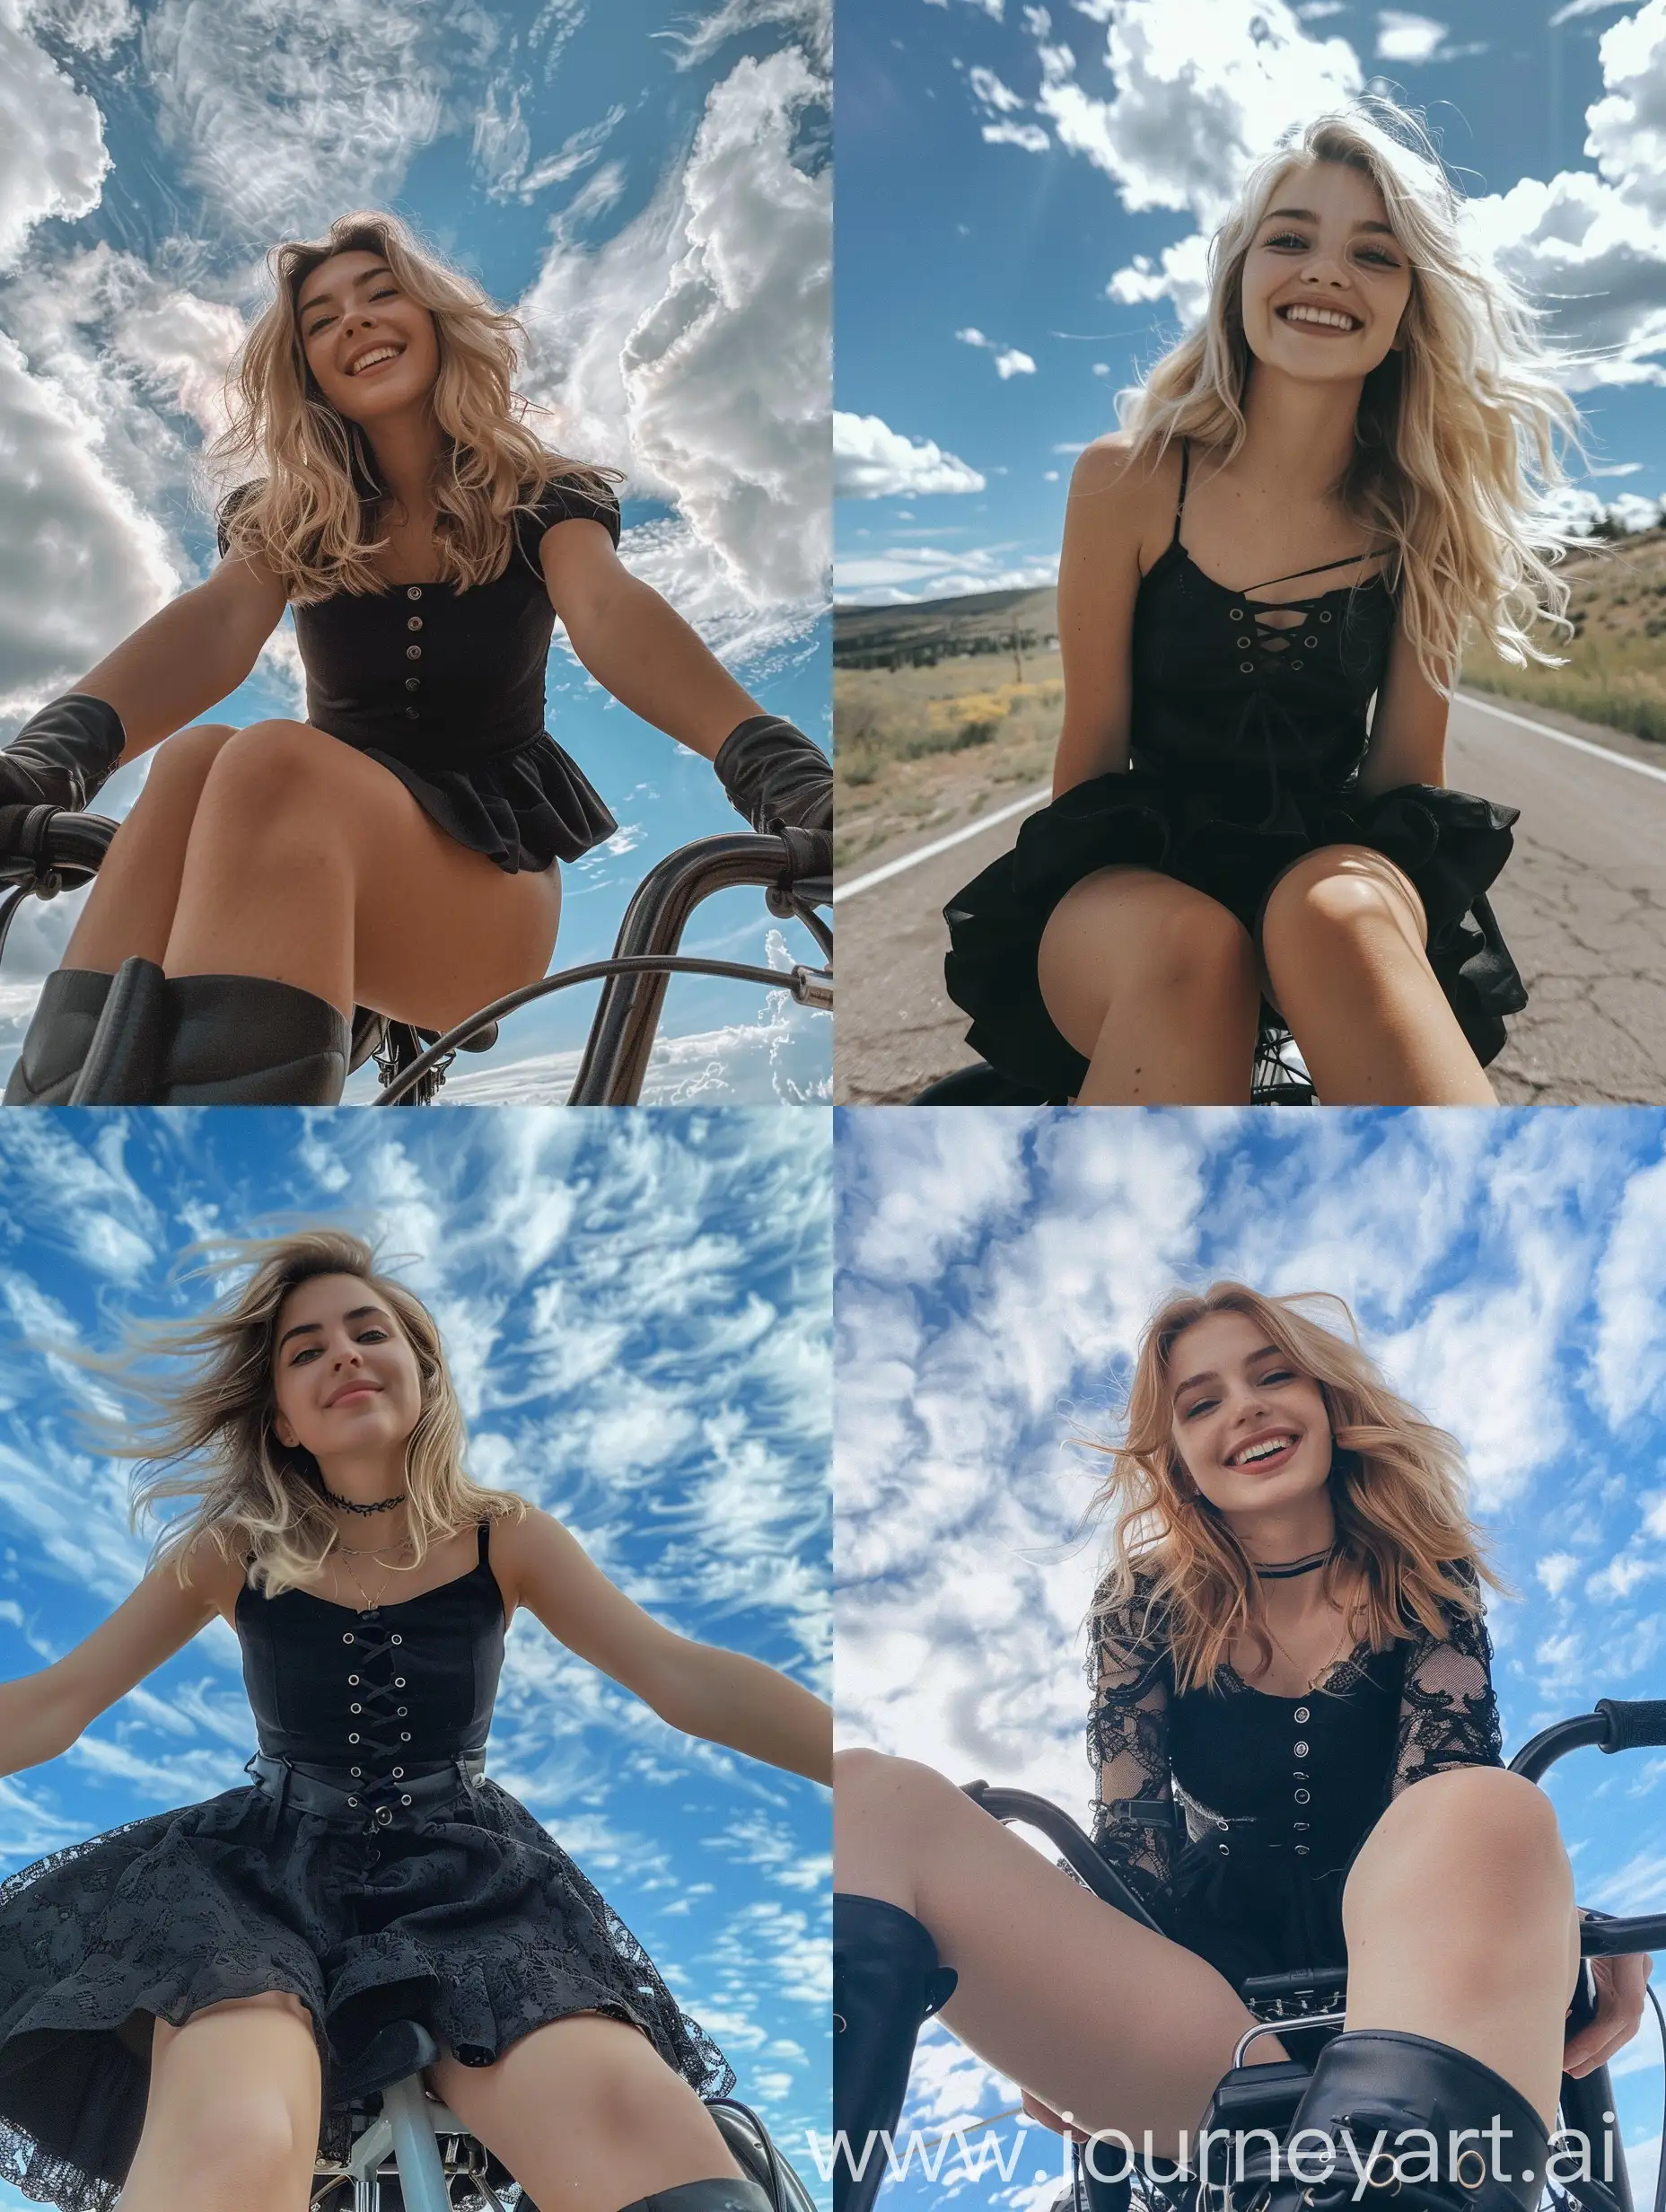 a girl, 22 years old, blonde hair, black dress, black boots, smiling, , sitting on a bicycle, fat legs, no effects, selfie , iphone selfie, no filters, natural , iphone photo natural, camera down angle, sky view, down view